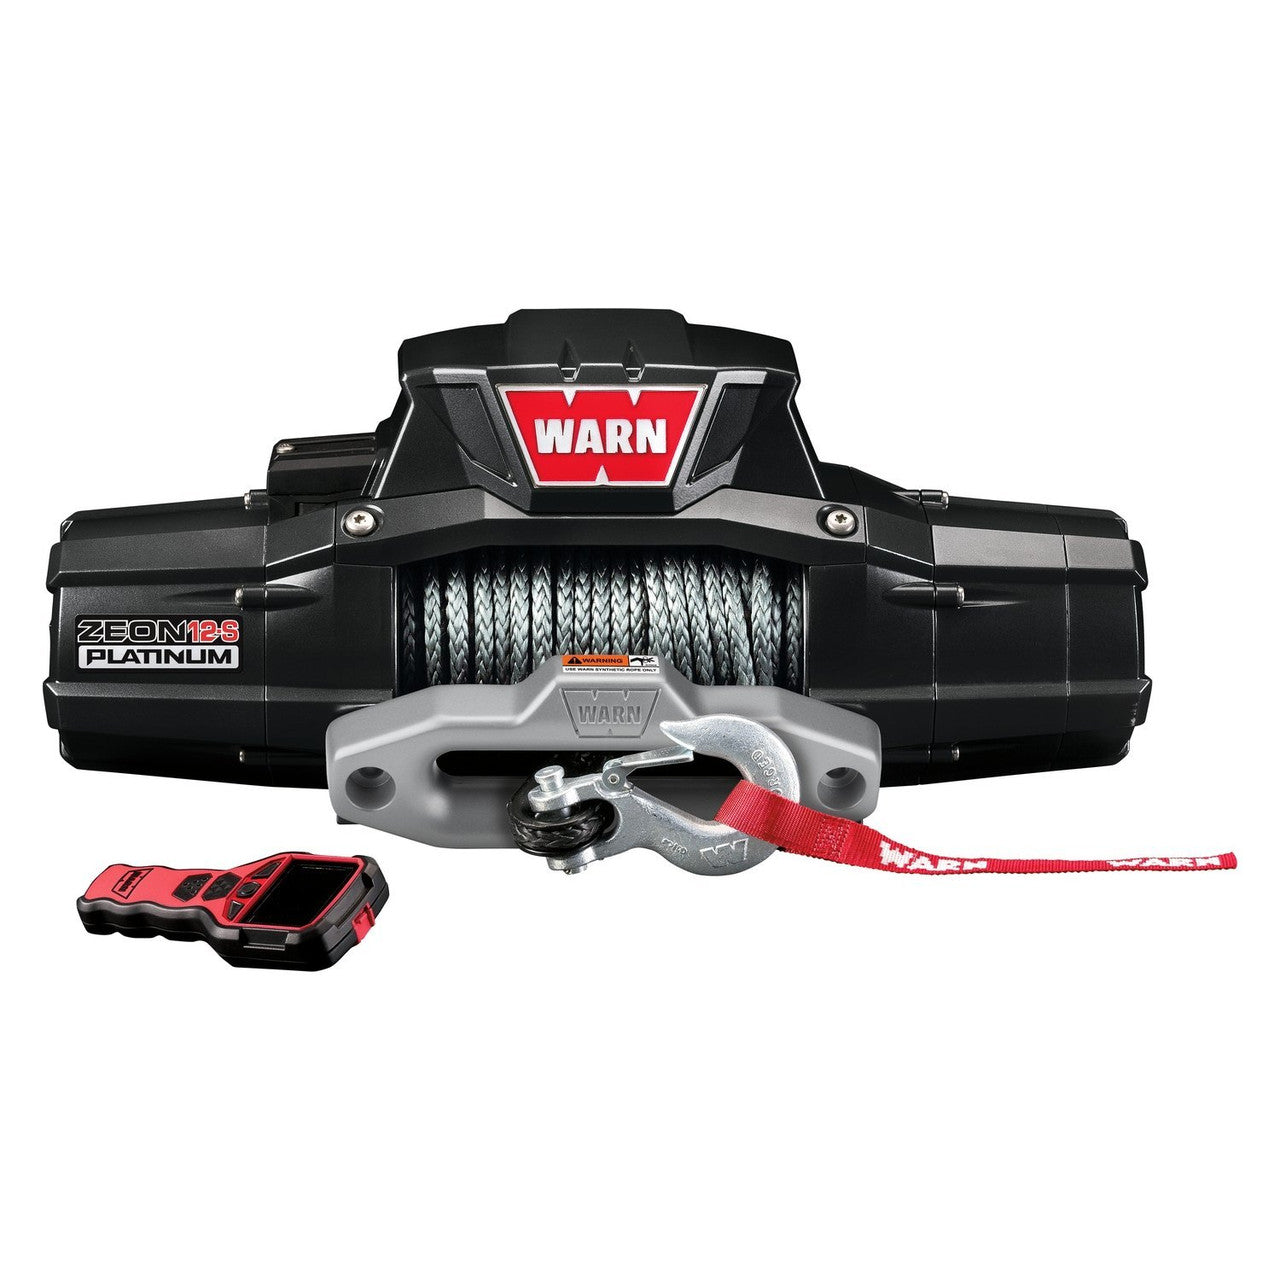 WARN ZEON 12-S Platinum Electric Winch 12000lbs Synthetic Rope